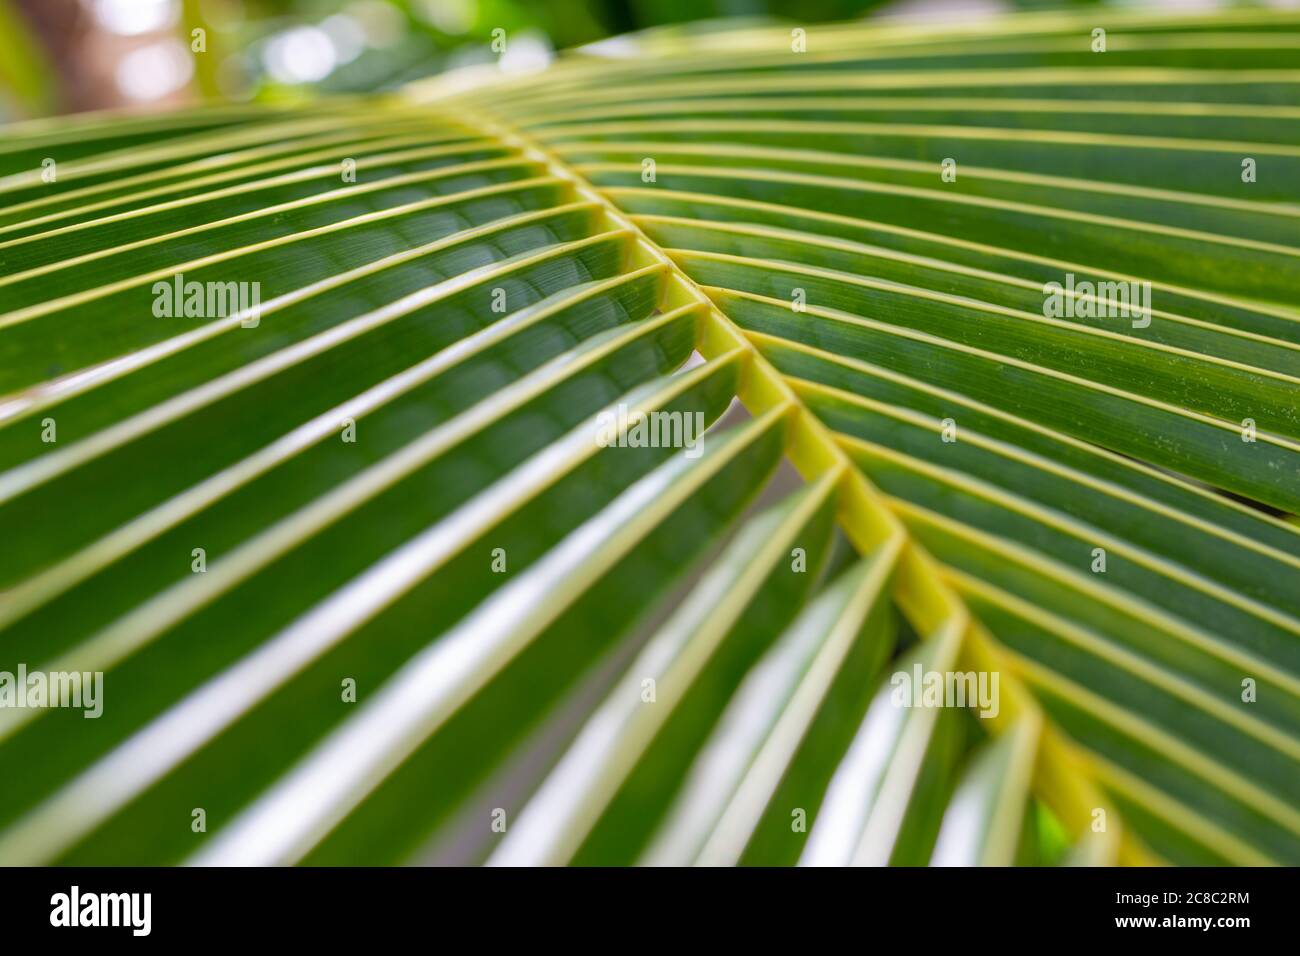 Tropical palm leaf background. Exotic nature pattern, palm texture under sunlight Stock Photo